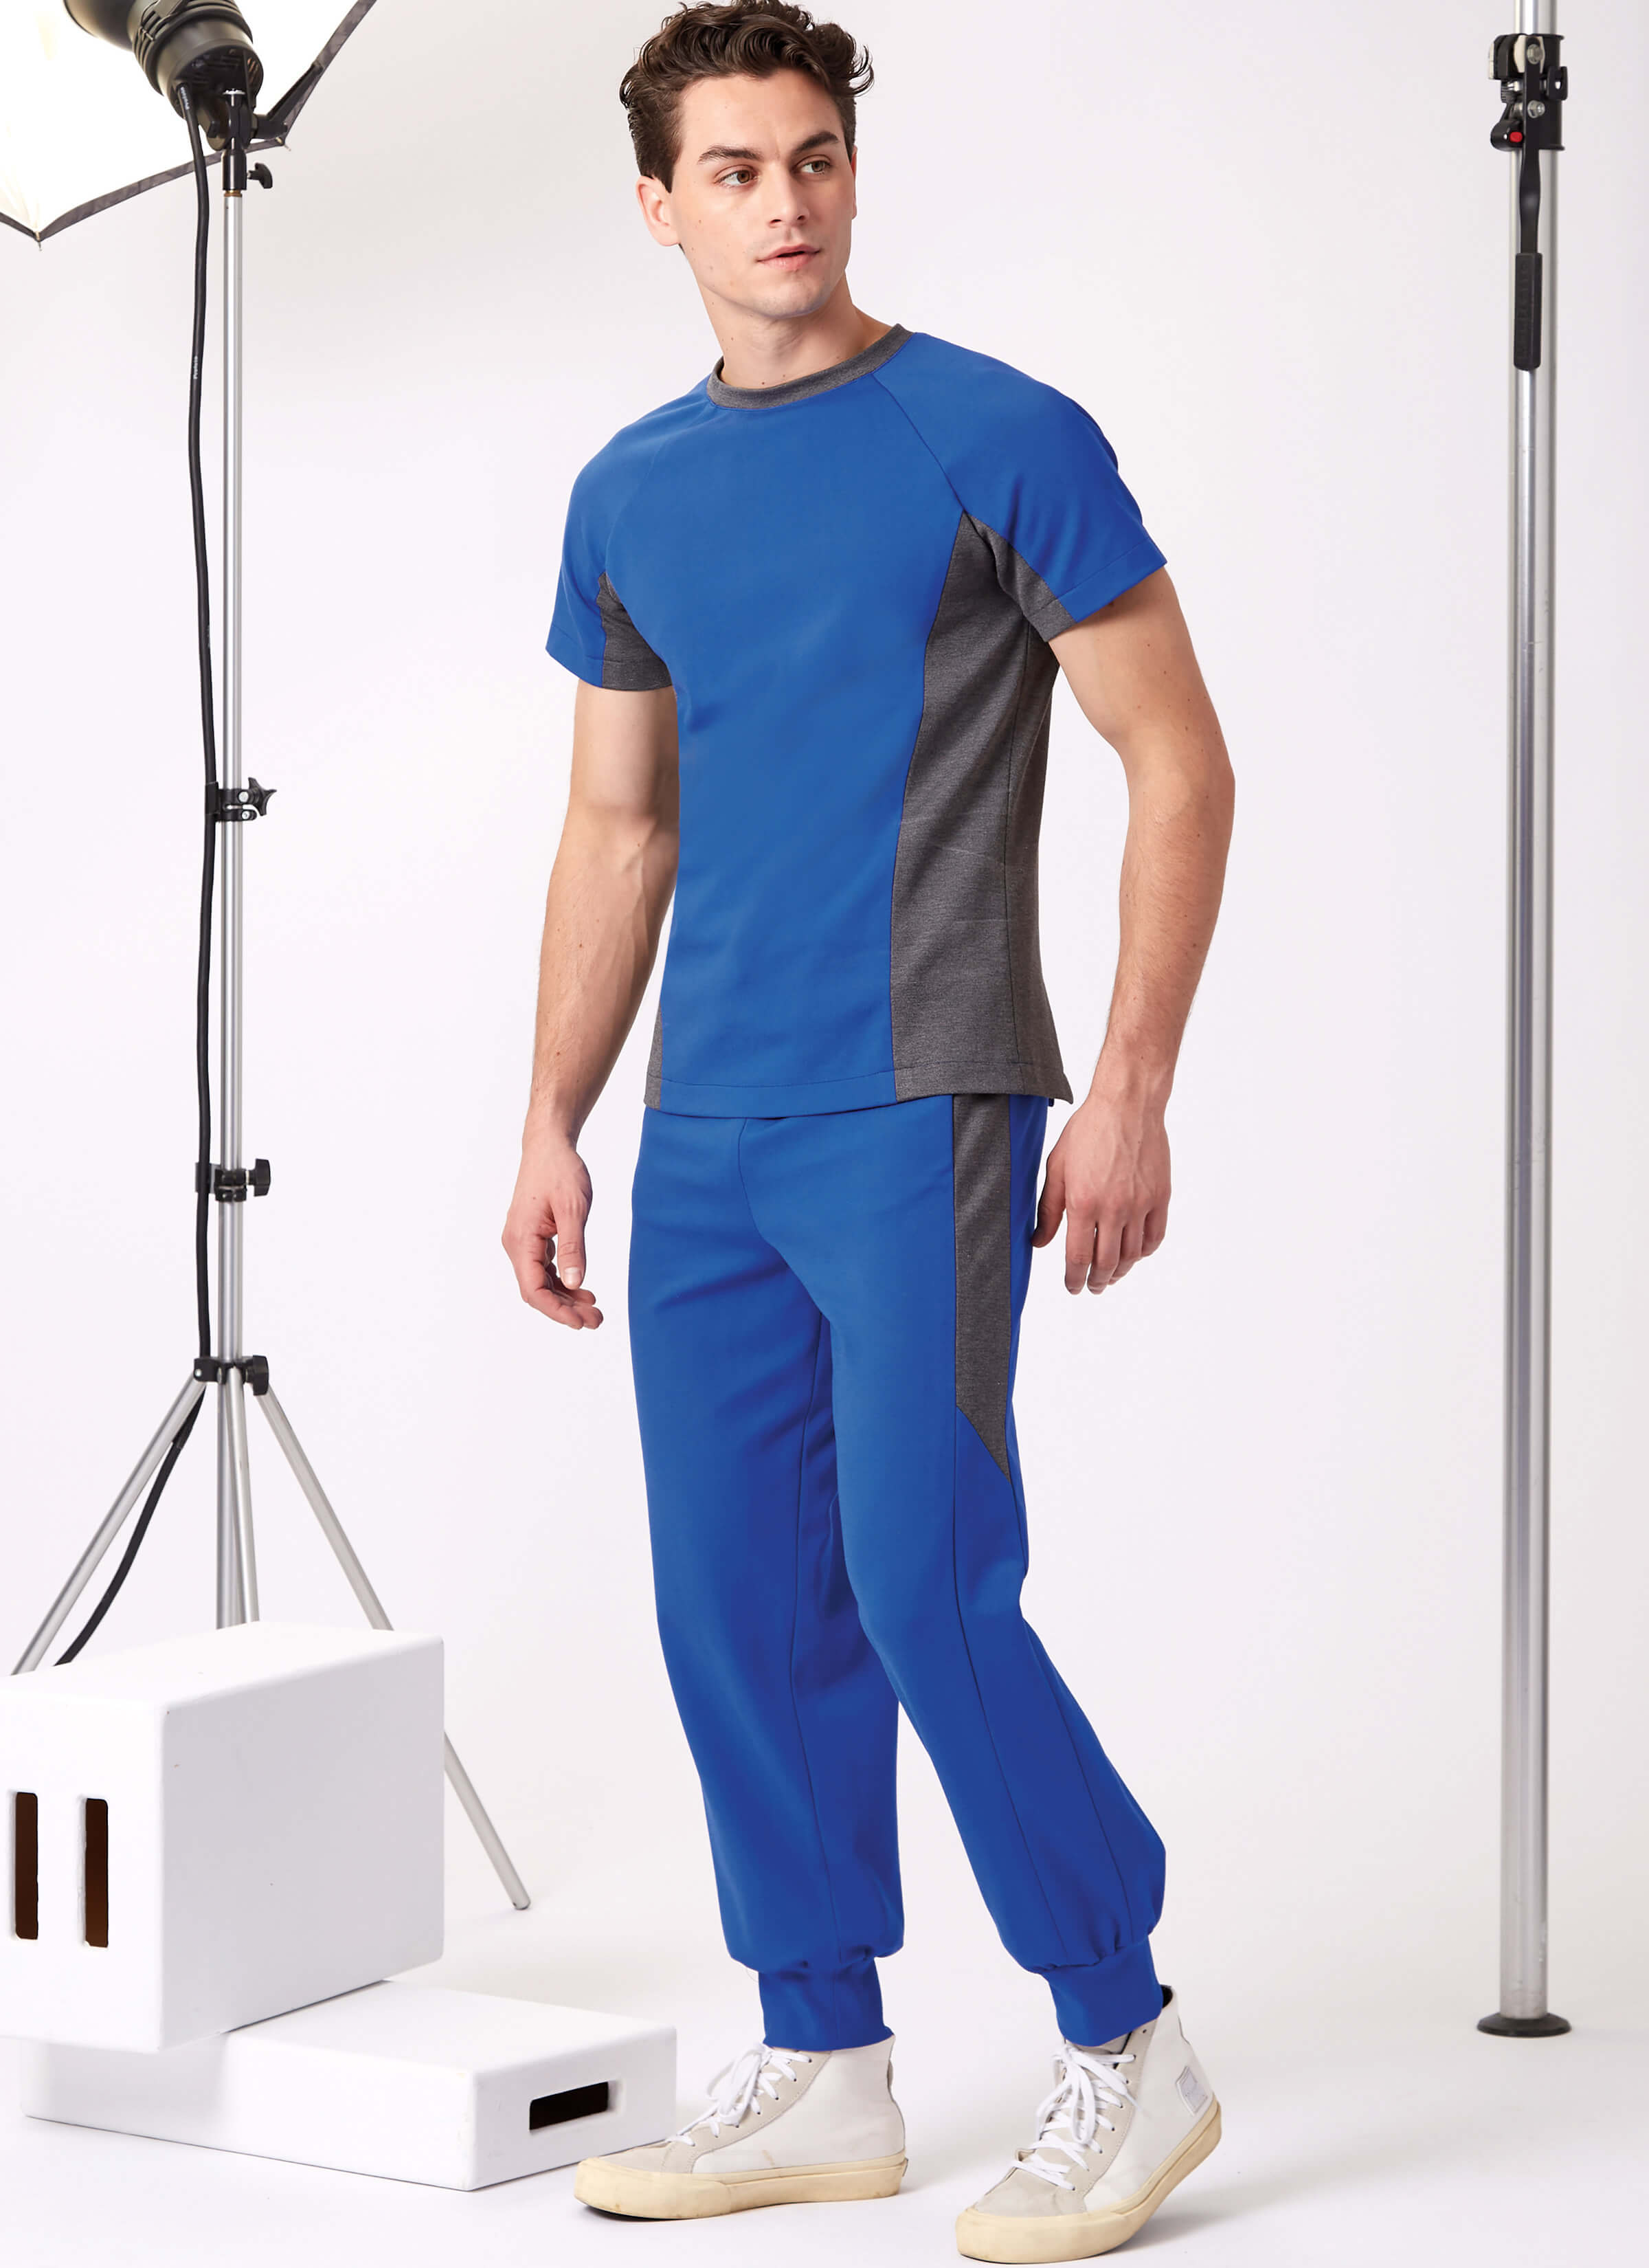 New Look Sewing Pattern N6760 Men's Knit Top and Joggers